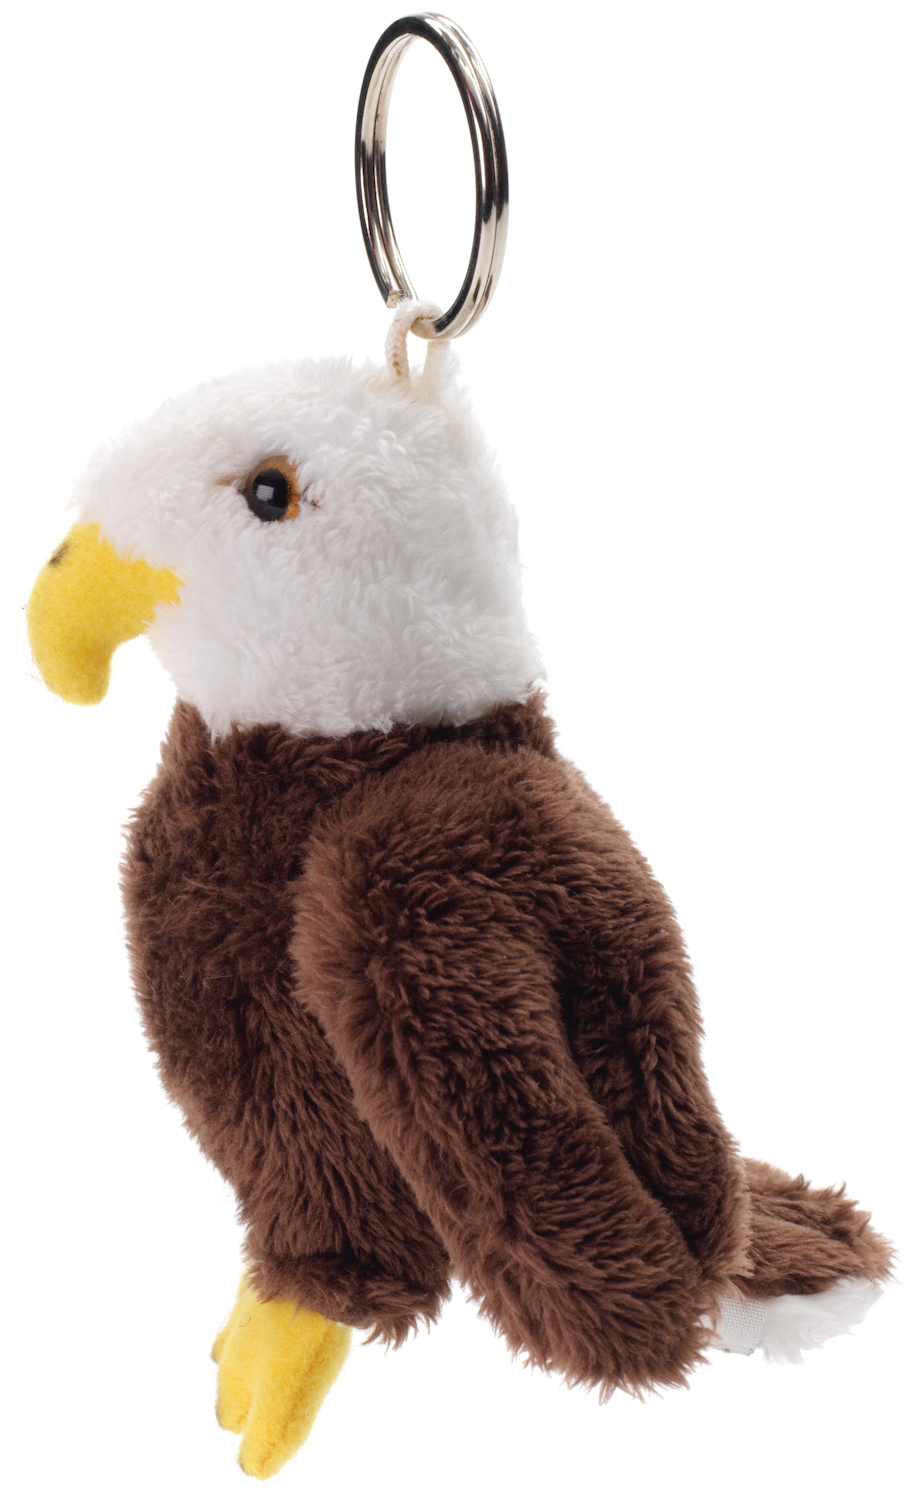 bald eagle with key ring - 11 cm (height)